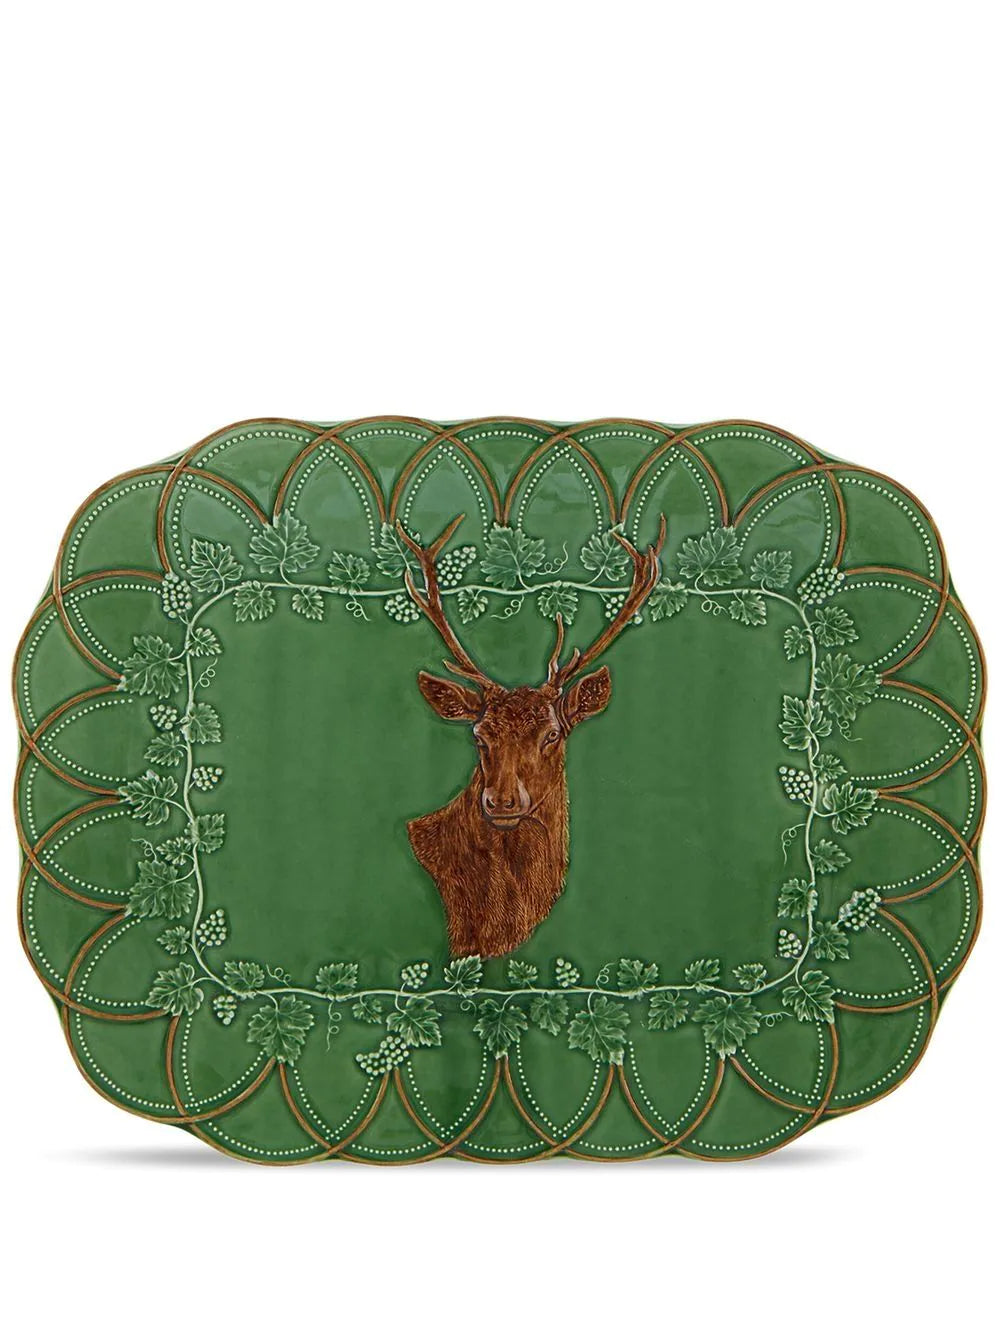 SOLD A large stag design earthernware platter by Bordallo Pinheiro, Portugal